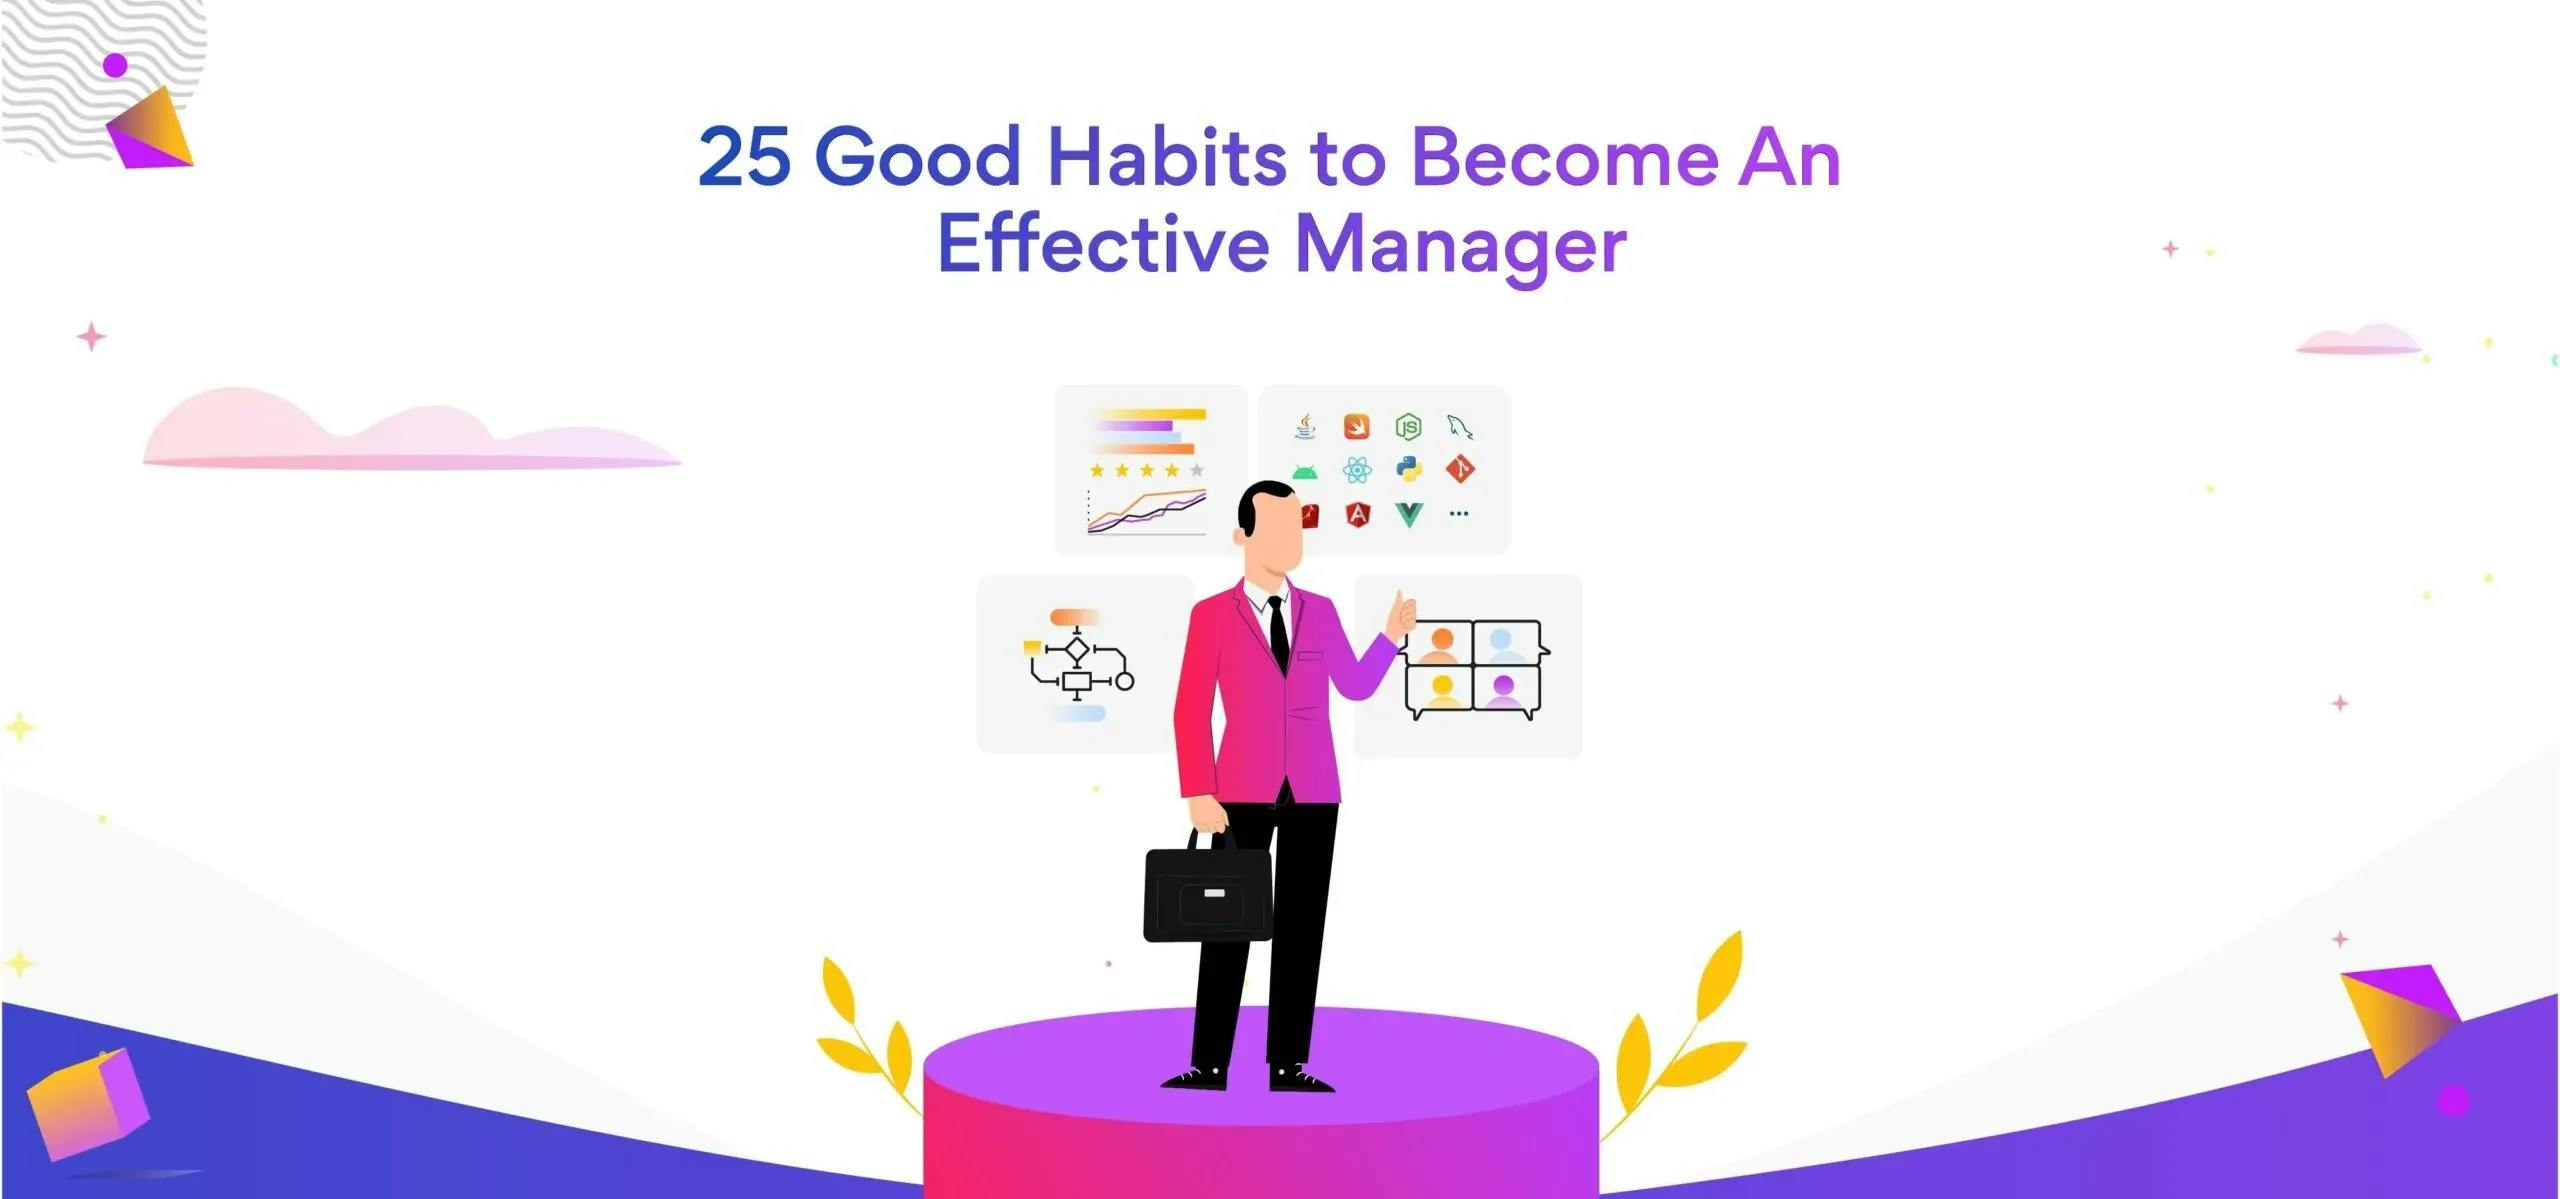 Develop These 25 Habits to Become An Effective Manager